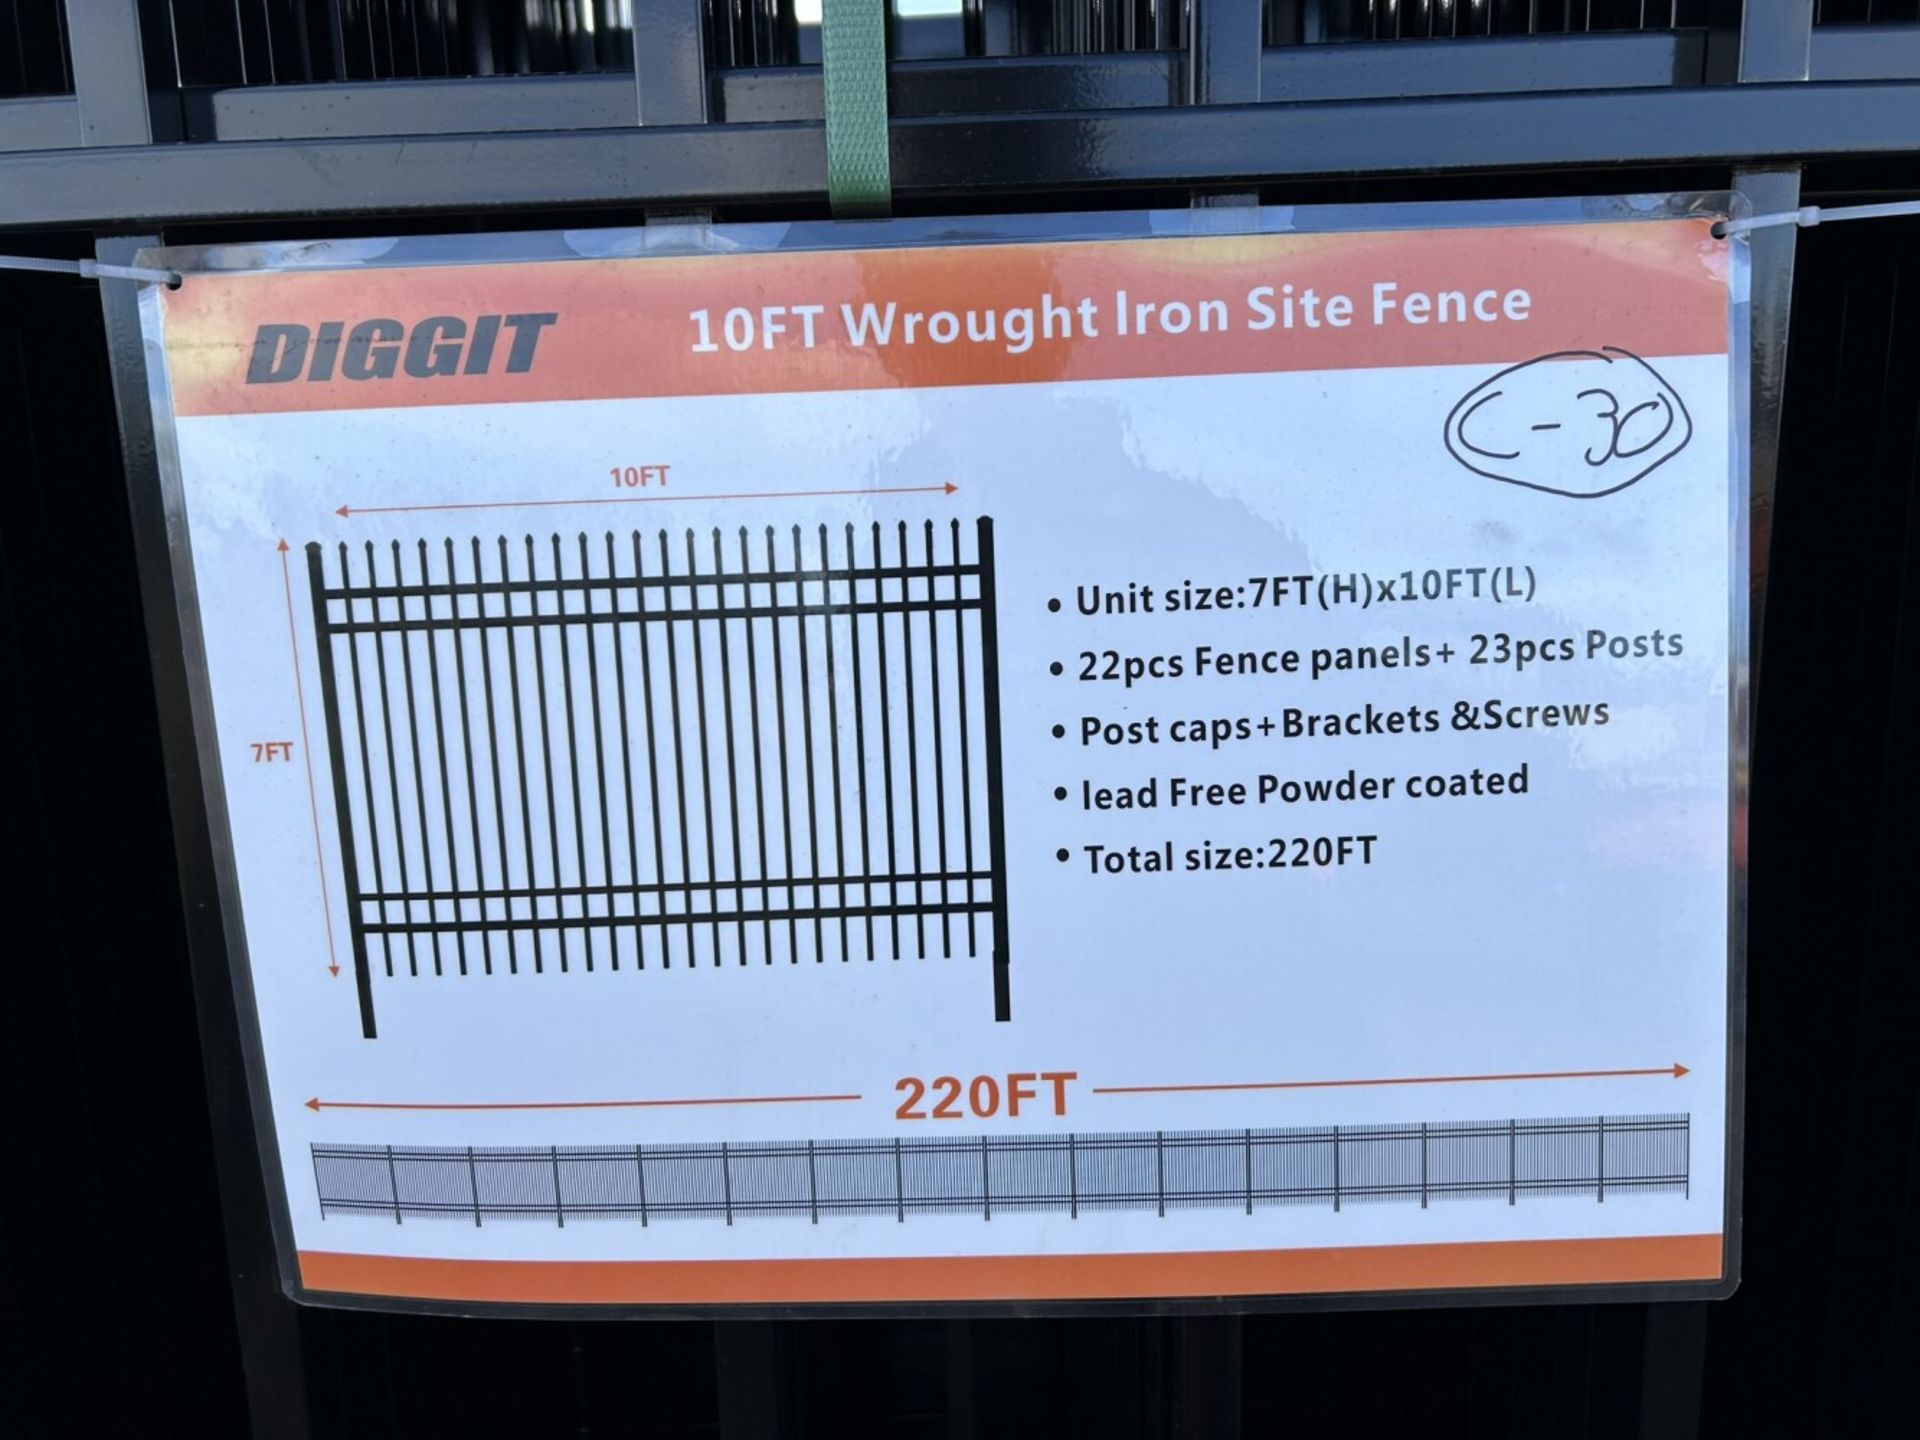 DIGGIT 10 FT ROD IRON SITE SITE FENCES - 22 PANELS 7 FT HIGH - Image 4 of 6